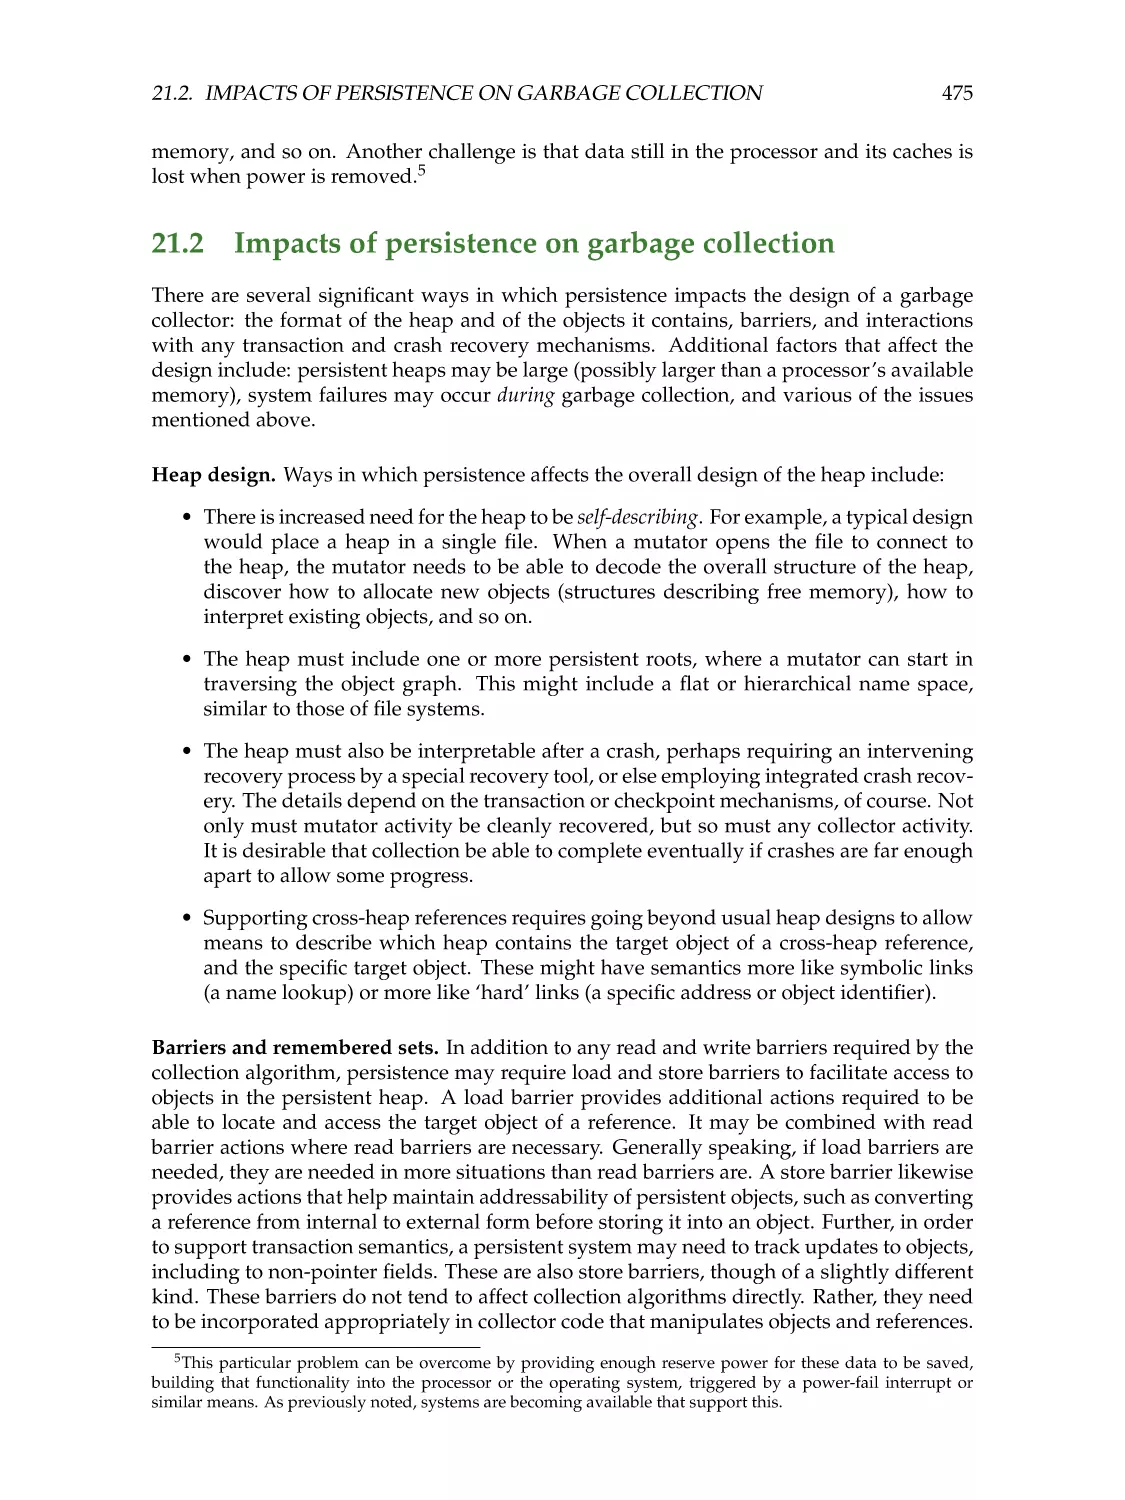 21.2. Impacts of persistence on garbage collection